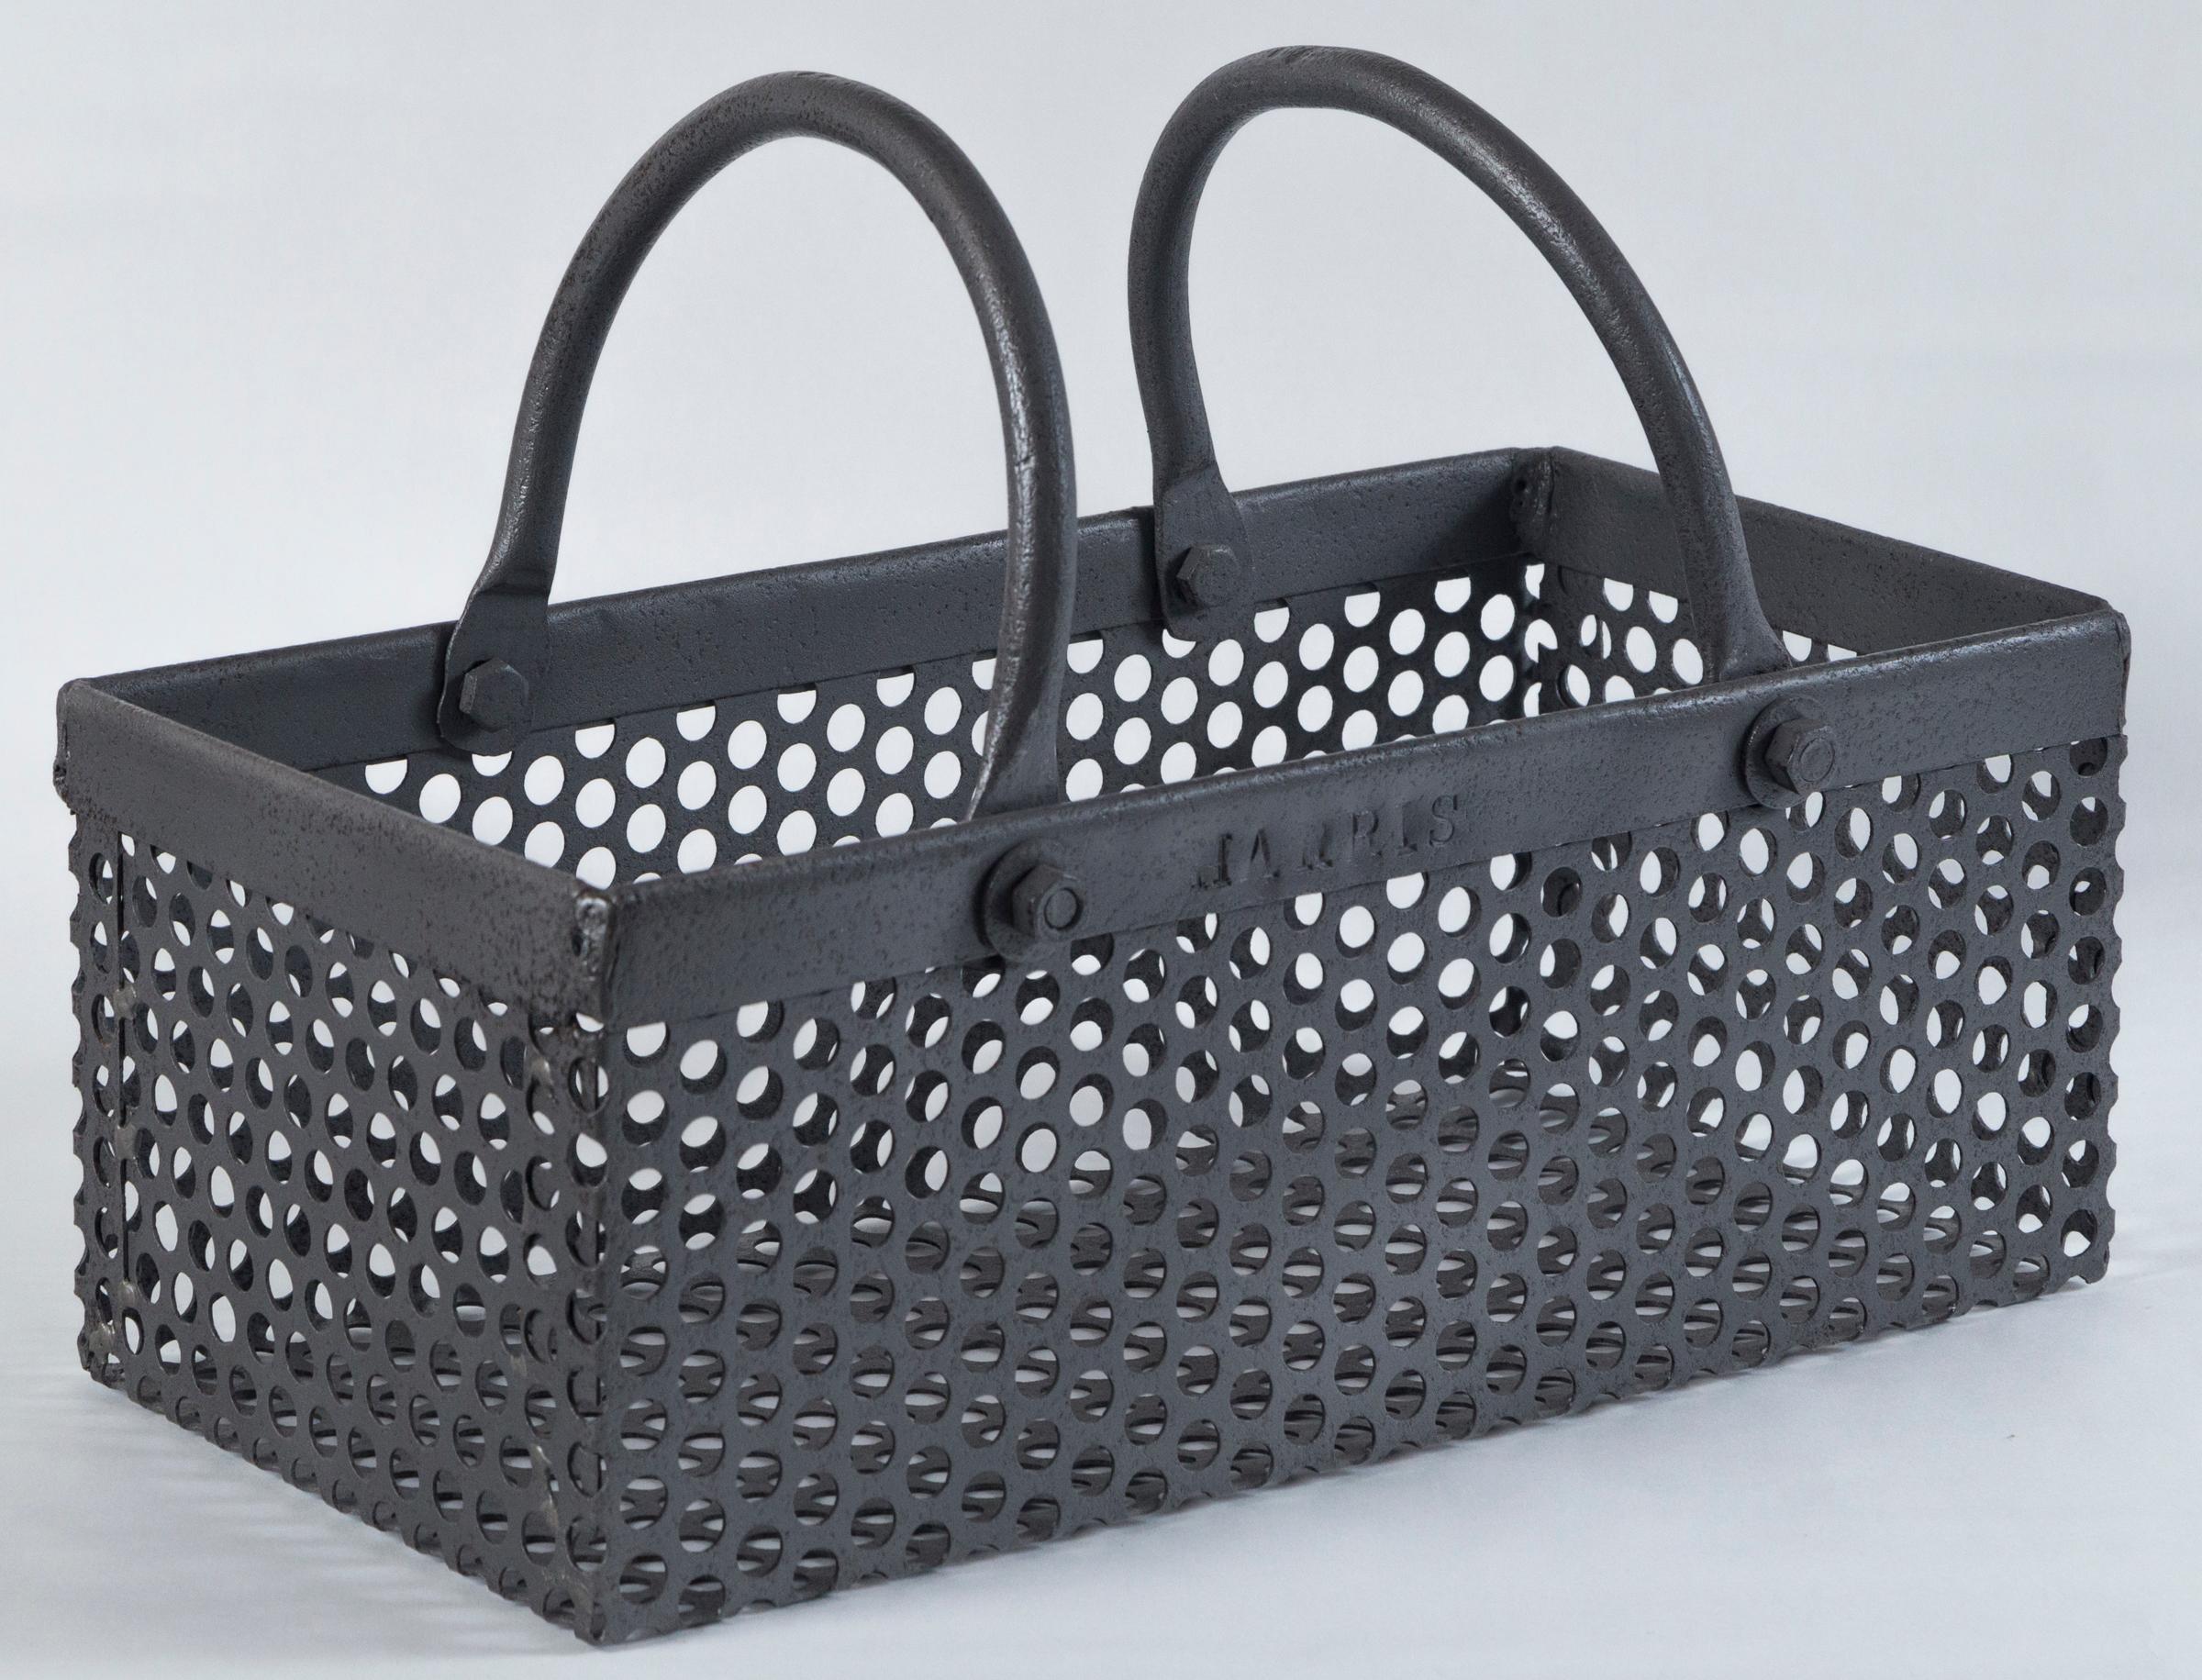 Vintage industrial iron basket, 20th century. Perforated body with two handles. Stamped 'HARRIS’.